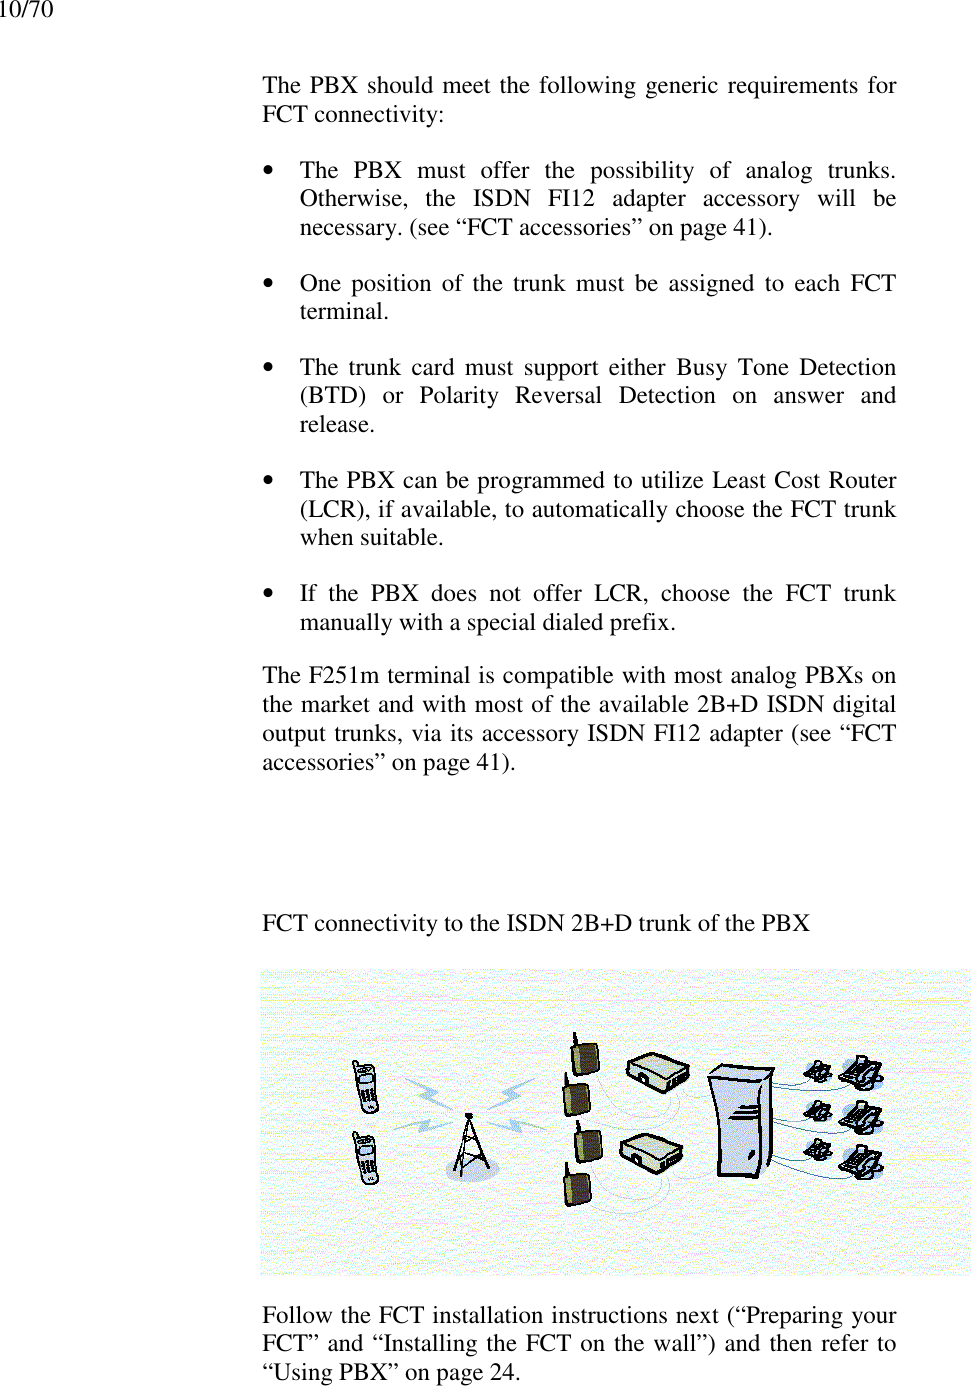 10/70The PBX should meet the following generic requirements forFCT connectivity:• The PBX must offer the possibility of analog trunks.Otherwise, the ISDN FI12 adapter accessory will benecessary. (see “FCT accessories” on page 41).• One position of the trunk must be assigned to each FCTterminal.• The trunk card must support either Busy Tone Detection(BTD) or Polarity Reversal Detection on answer andrelease.• The PBX can be programmed to utilize Least Cost Router(LCR), if available, to automatically choose the FCT trunkwhen suitable.• If the PBX does not offer LCR, choose the FCT trunkmanually with a special dialed prefix.The F251m terminal is compatible with most analog PBXs onthe market and with most of the available 2B+D ISDN digitaloutput trunks, via its accessory ISDN FI12 adapter (see “FCTaccessories” on page 41).FCT connectivity to the ISDN 2B+D trunk of the PBXFollow the FCT installation instructions next (“Preparing yourFCT” and “Installing the FCT on the wall”) and then refer to“Using PBX” on page 24.